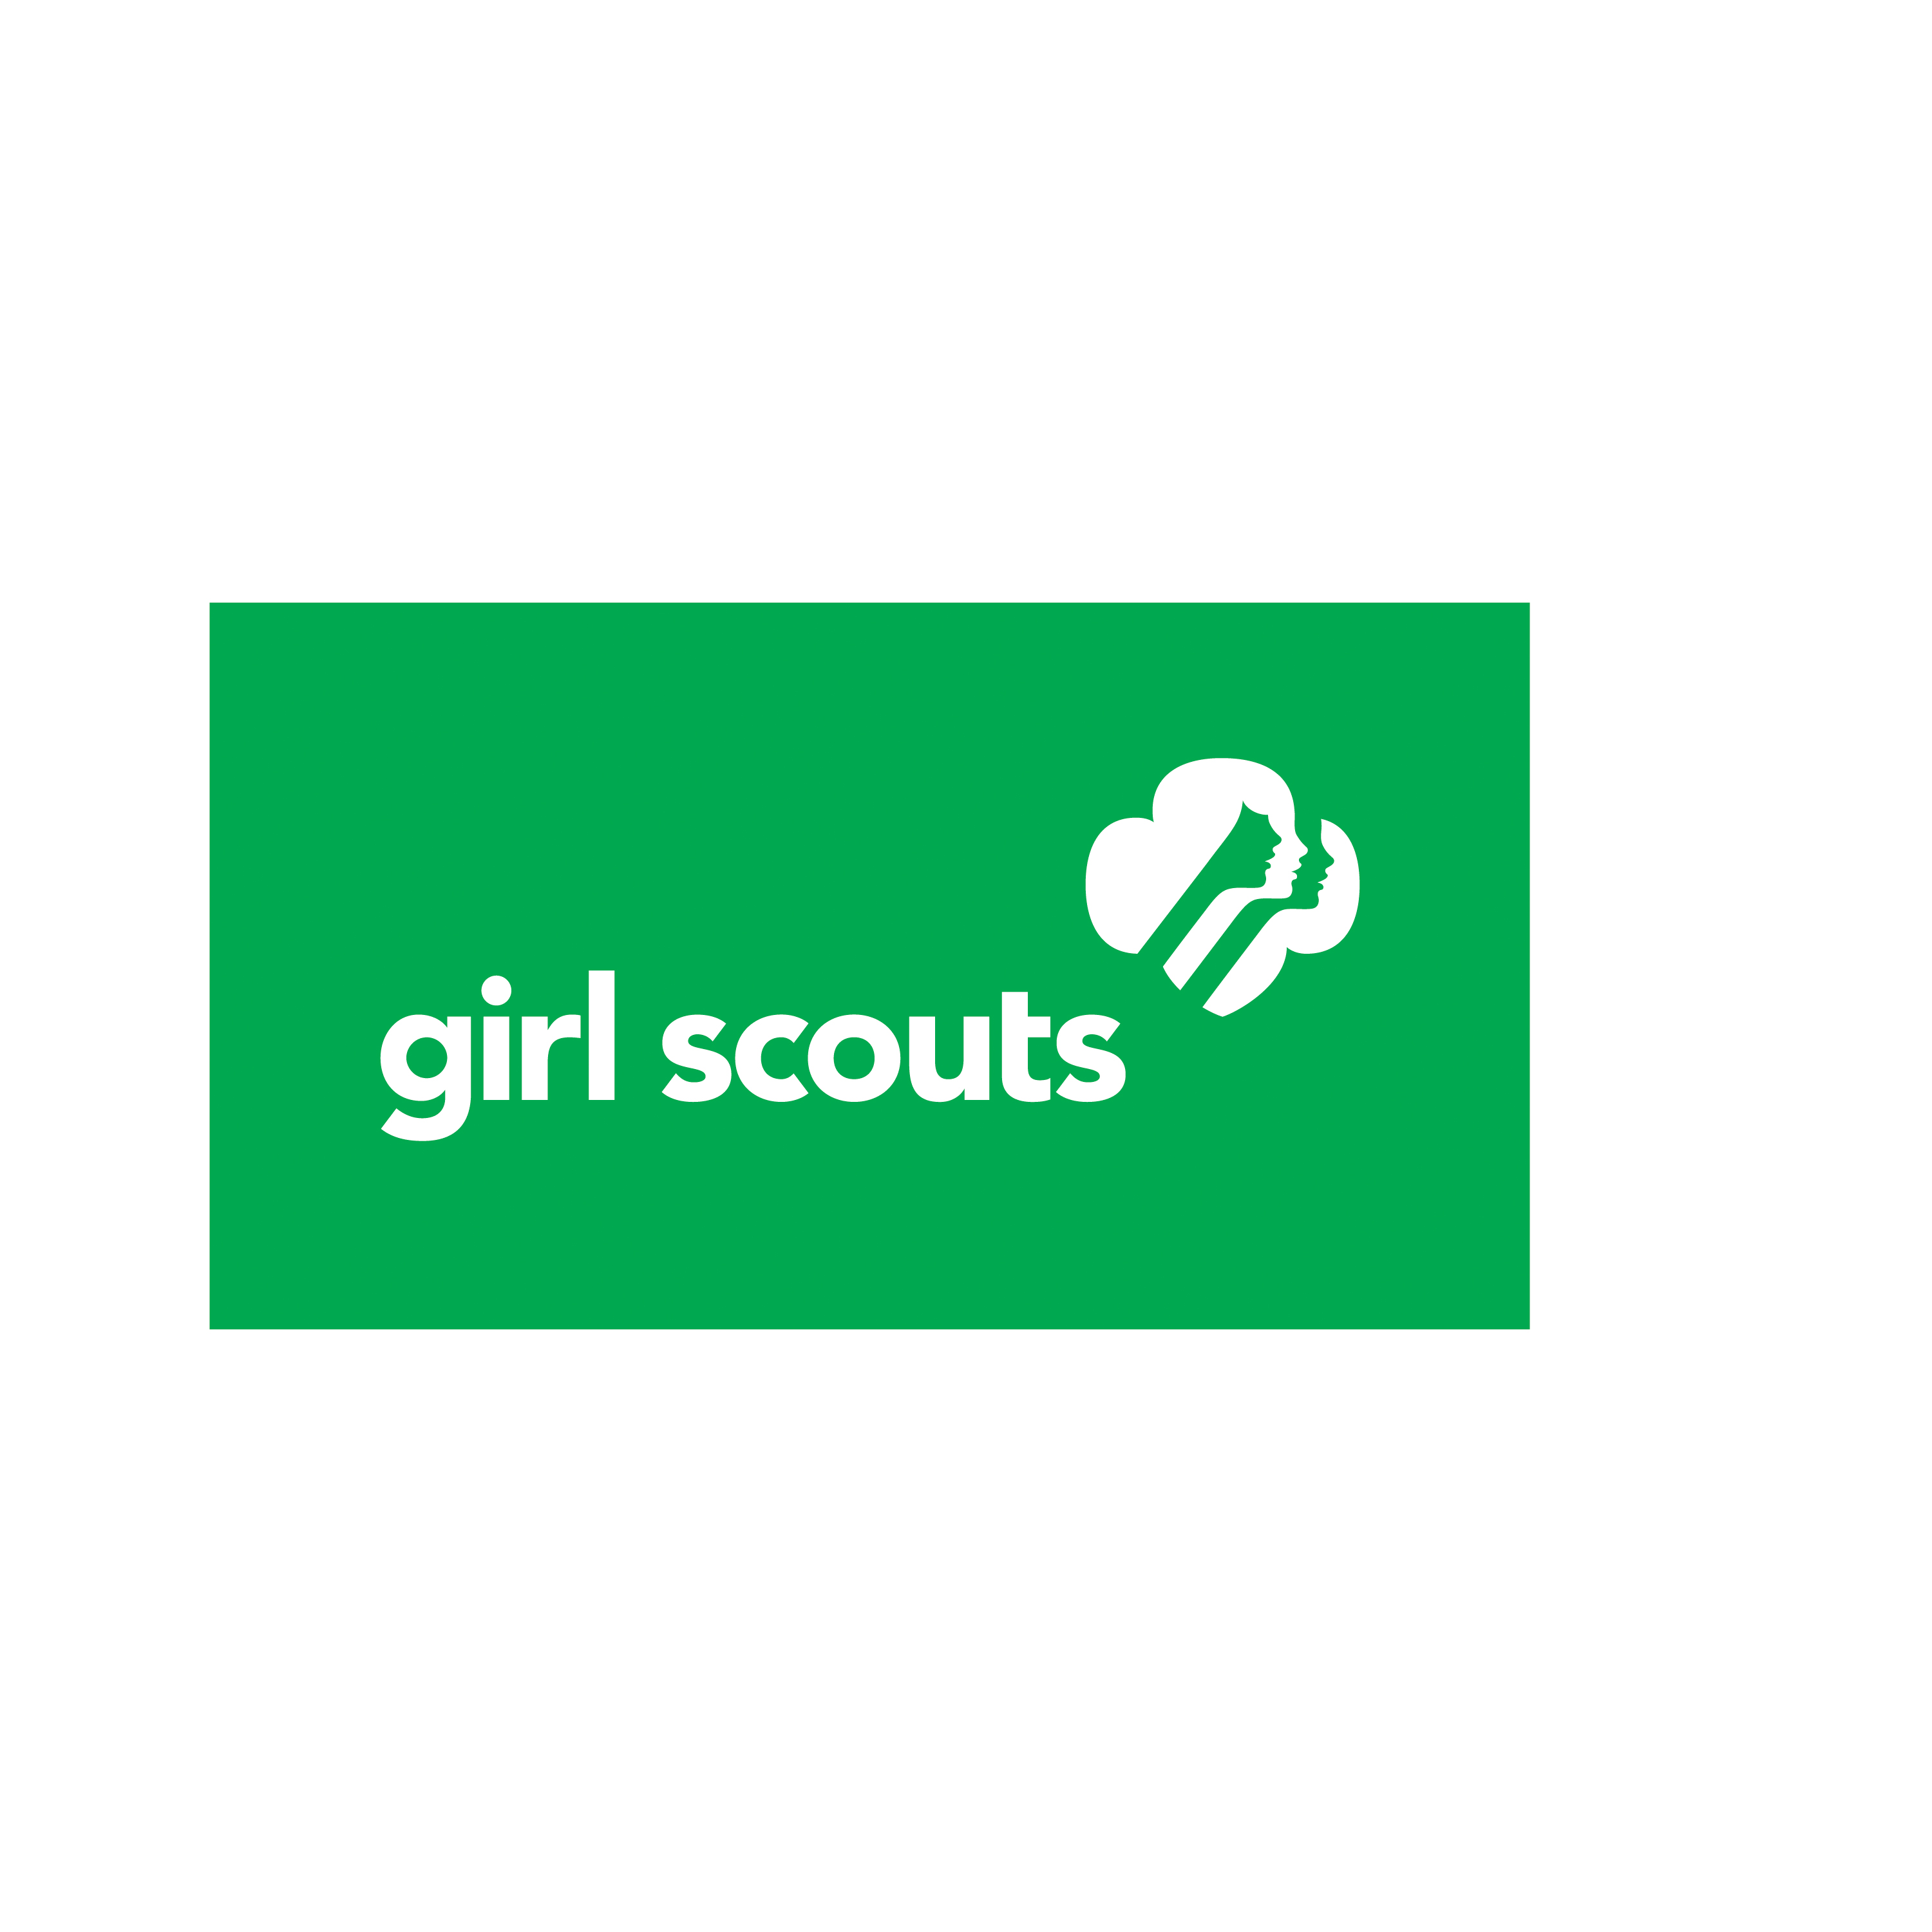 clip art of girl scouts - photo #43